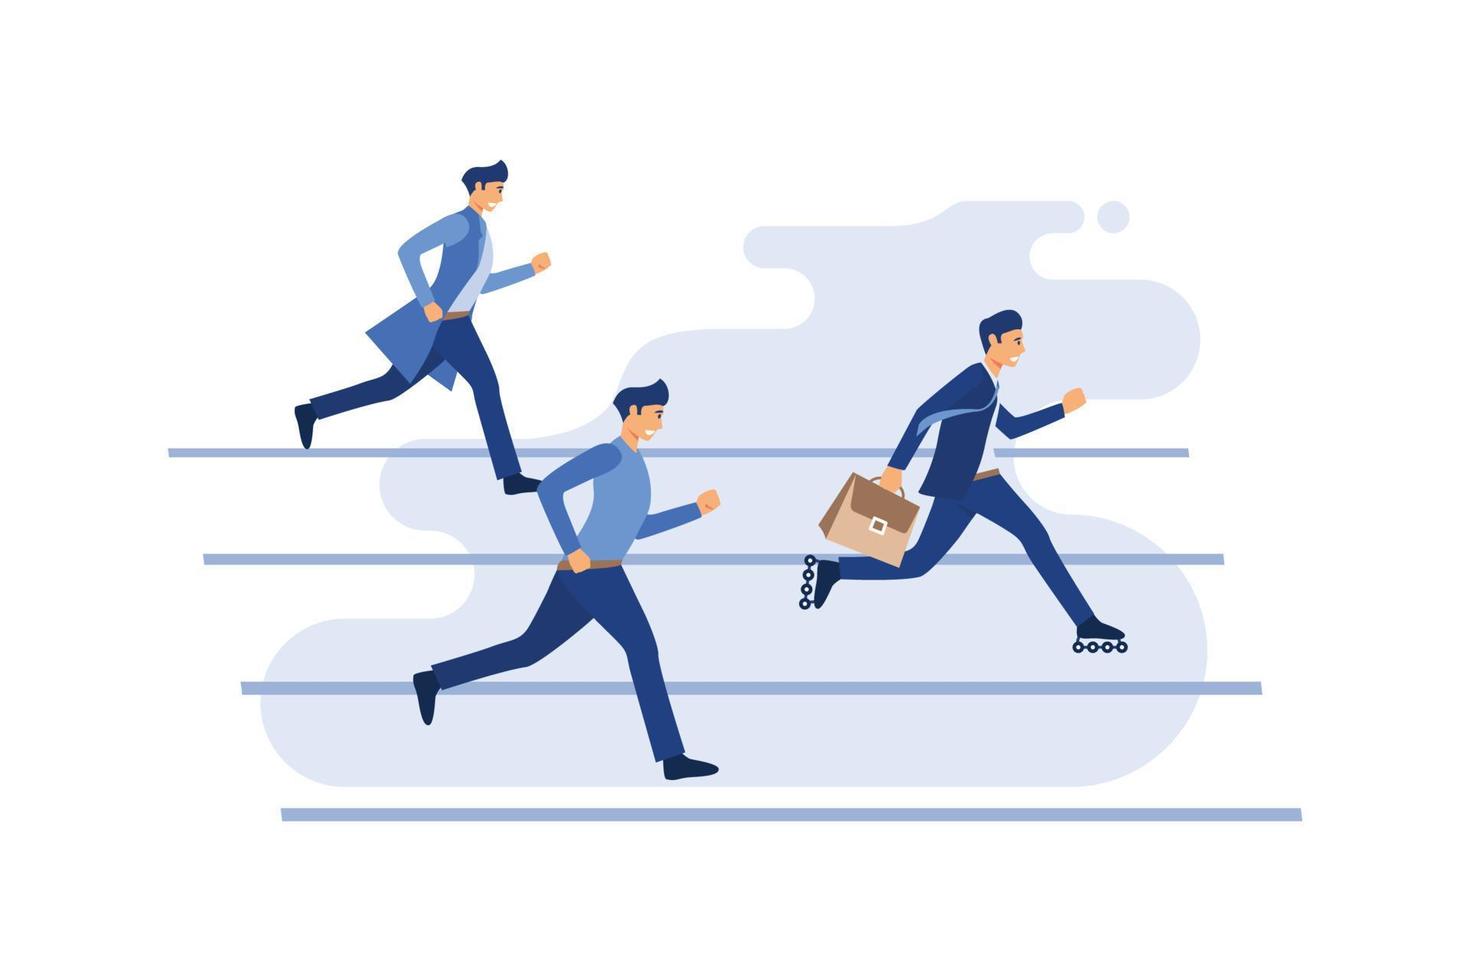 White collar workers in black suit racing on running track and a smart one carrying briefcase gets ahead by wearing inline skates. Creative vector cartoon illustration for business concept.